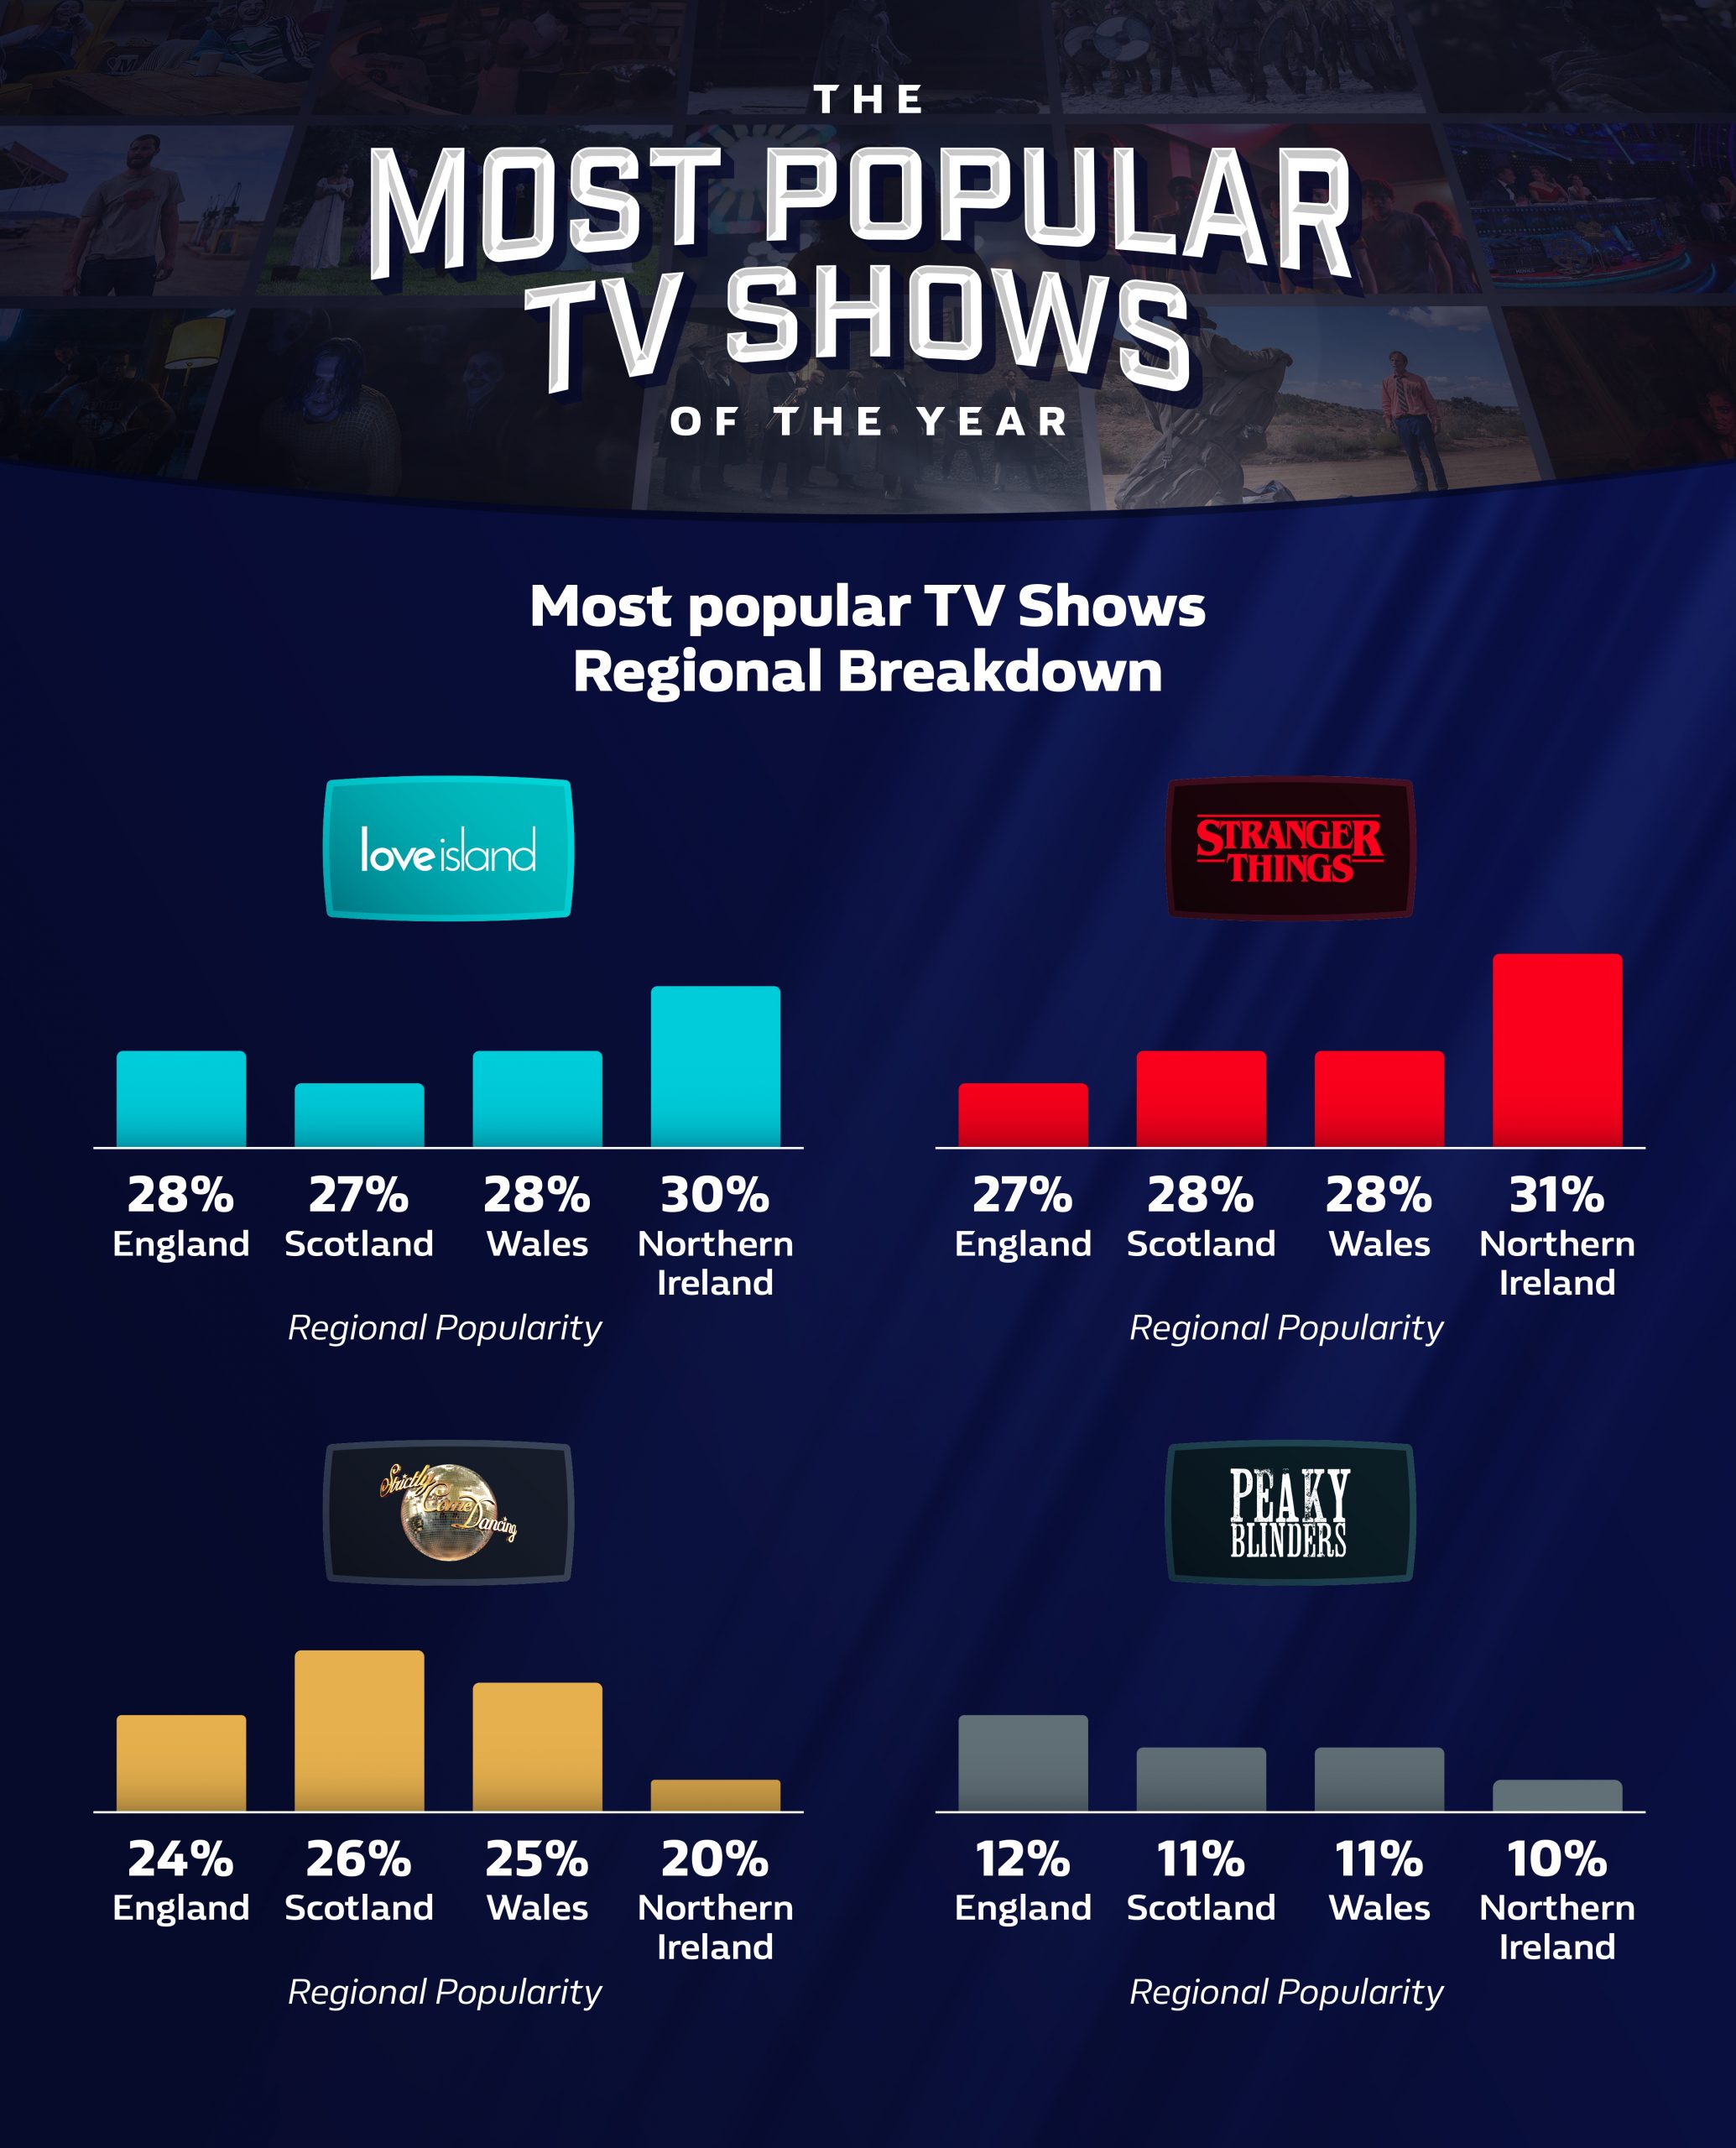 Most popular TV shows by region